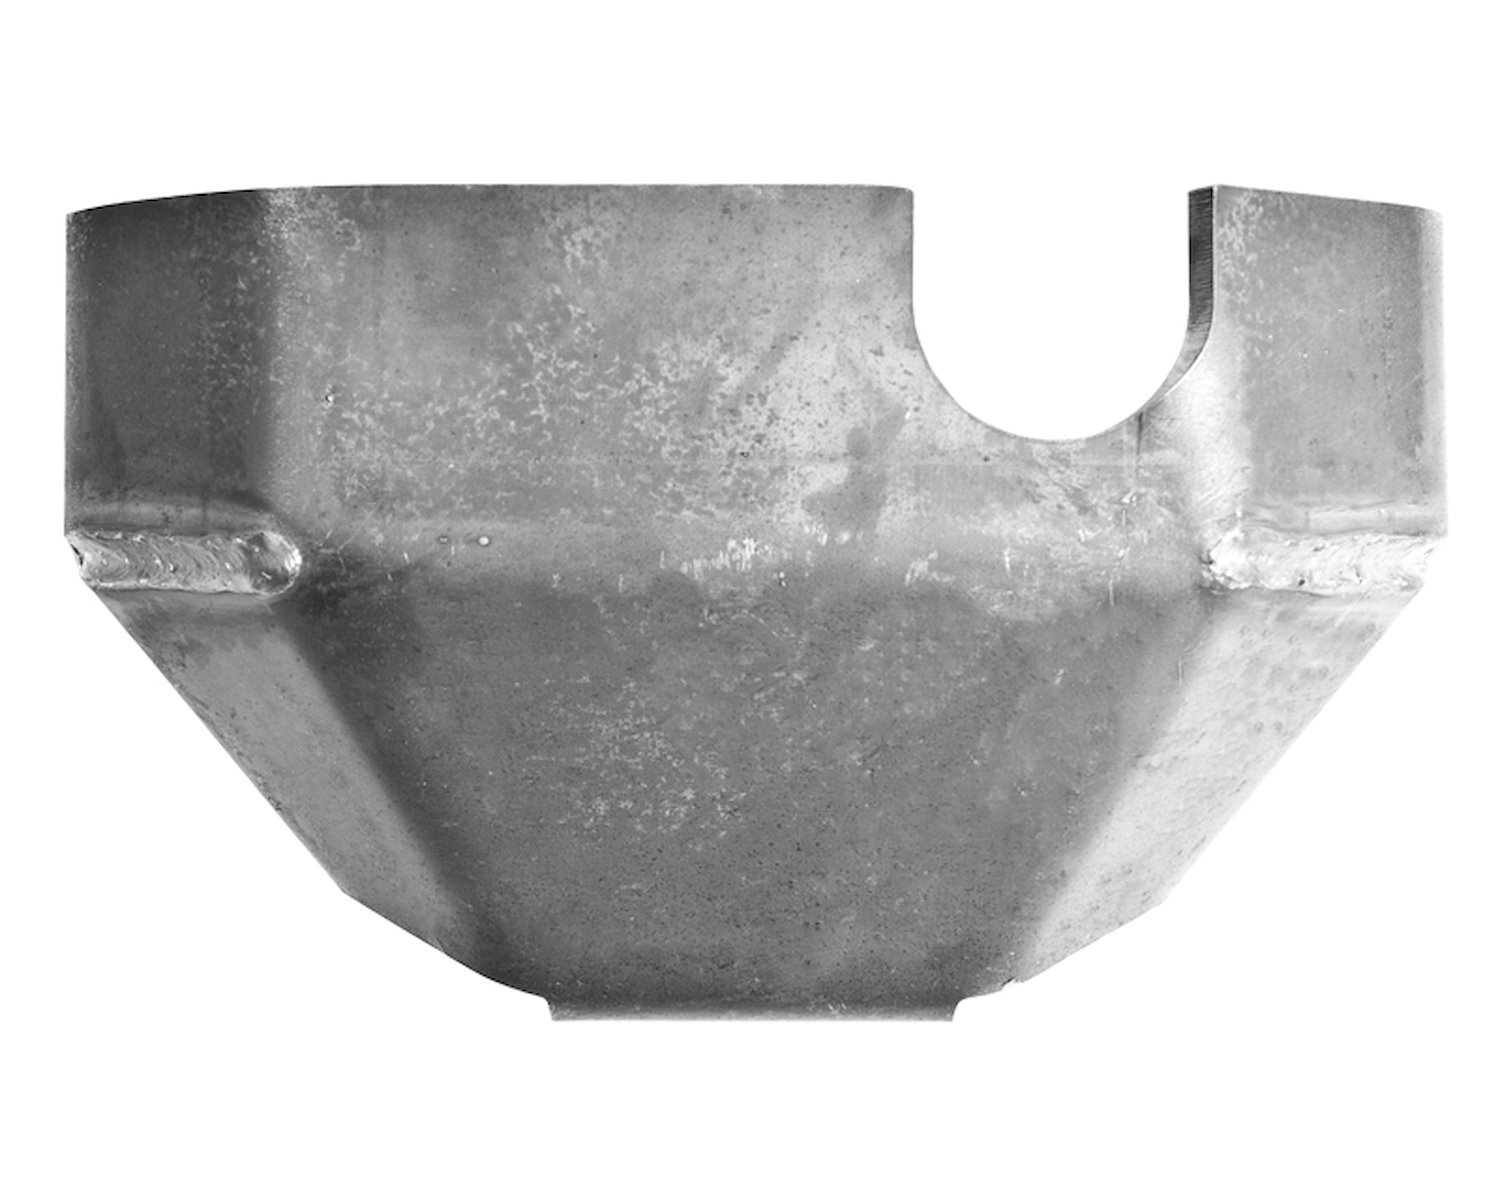 Weld-On Differential Armor for 1986-1995 Suzuki Samurai with Factory Diff. [Fits Front or Rear]